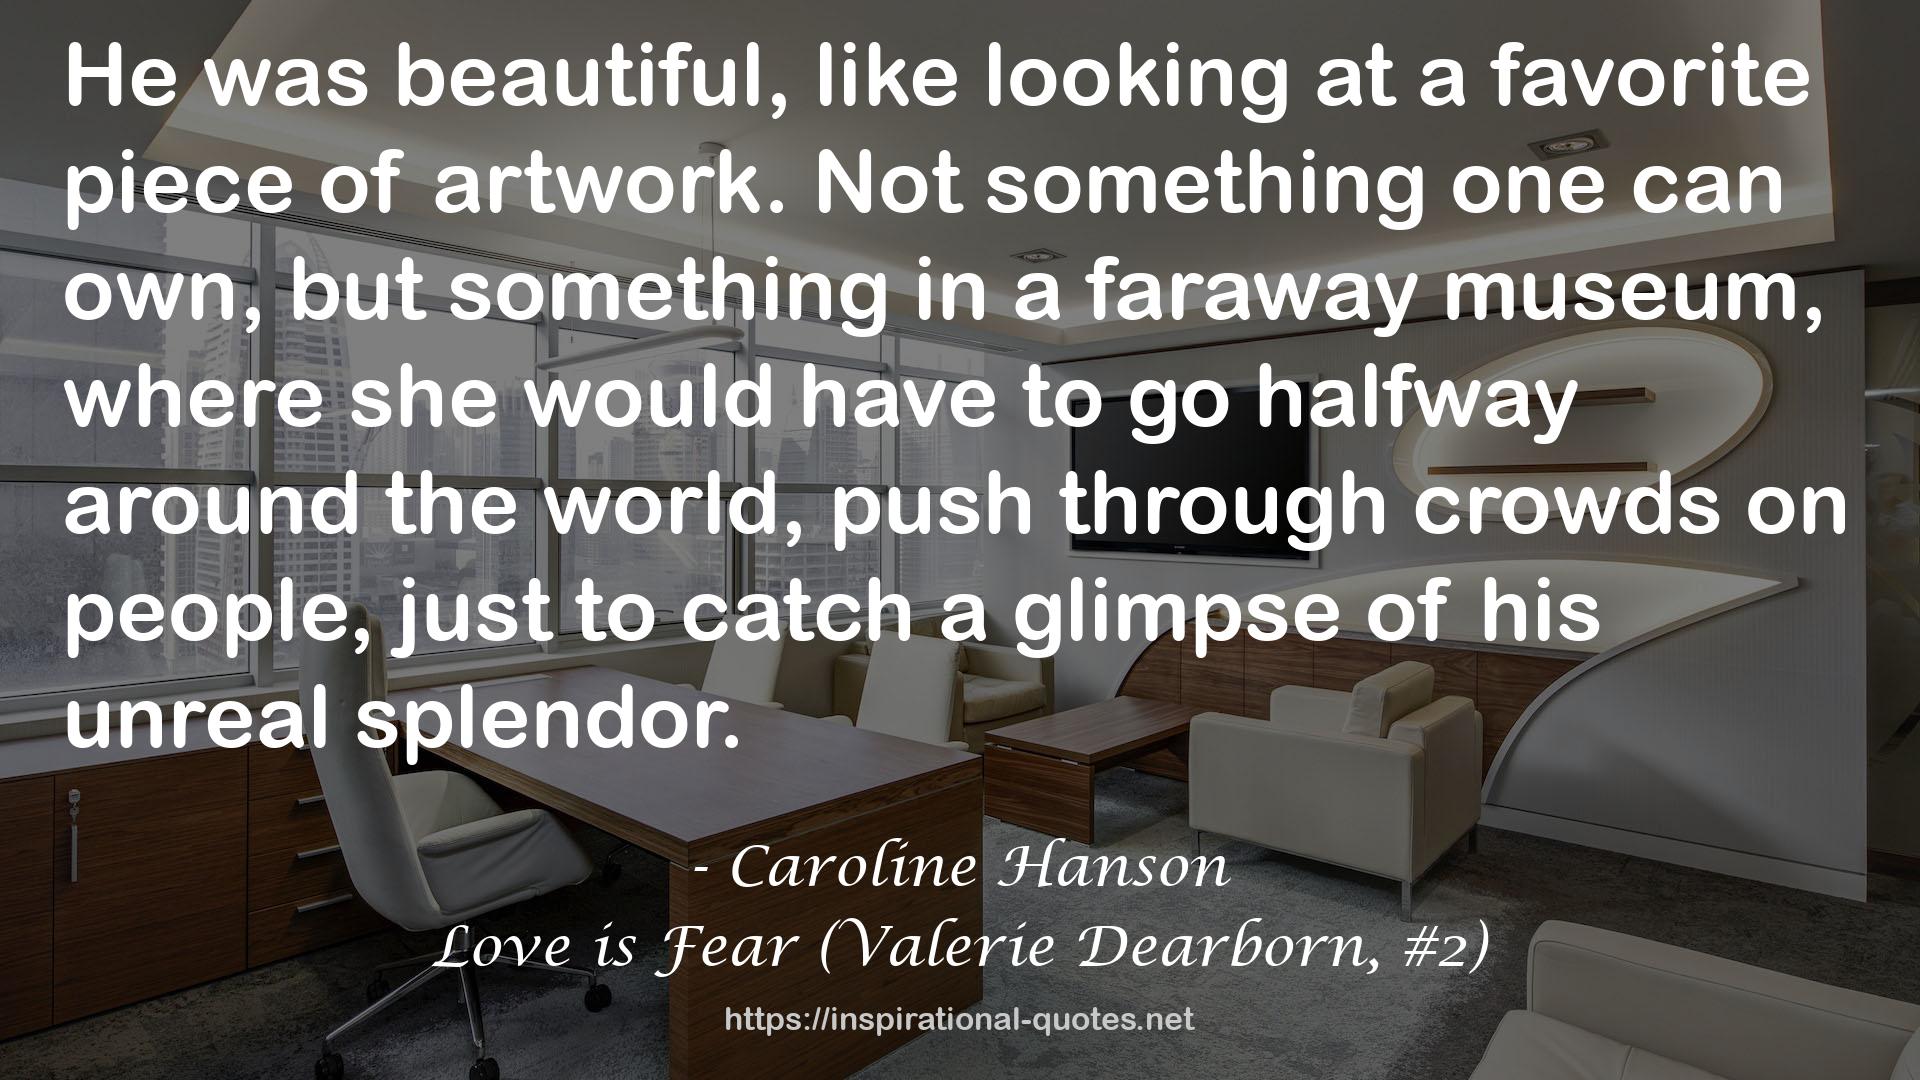 Love is Fear (Valerie Dearborn, #2) QUOTES